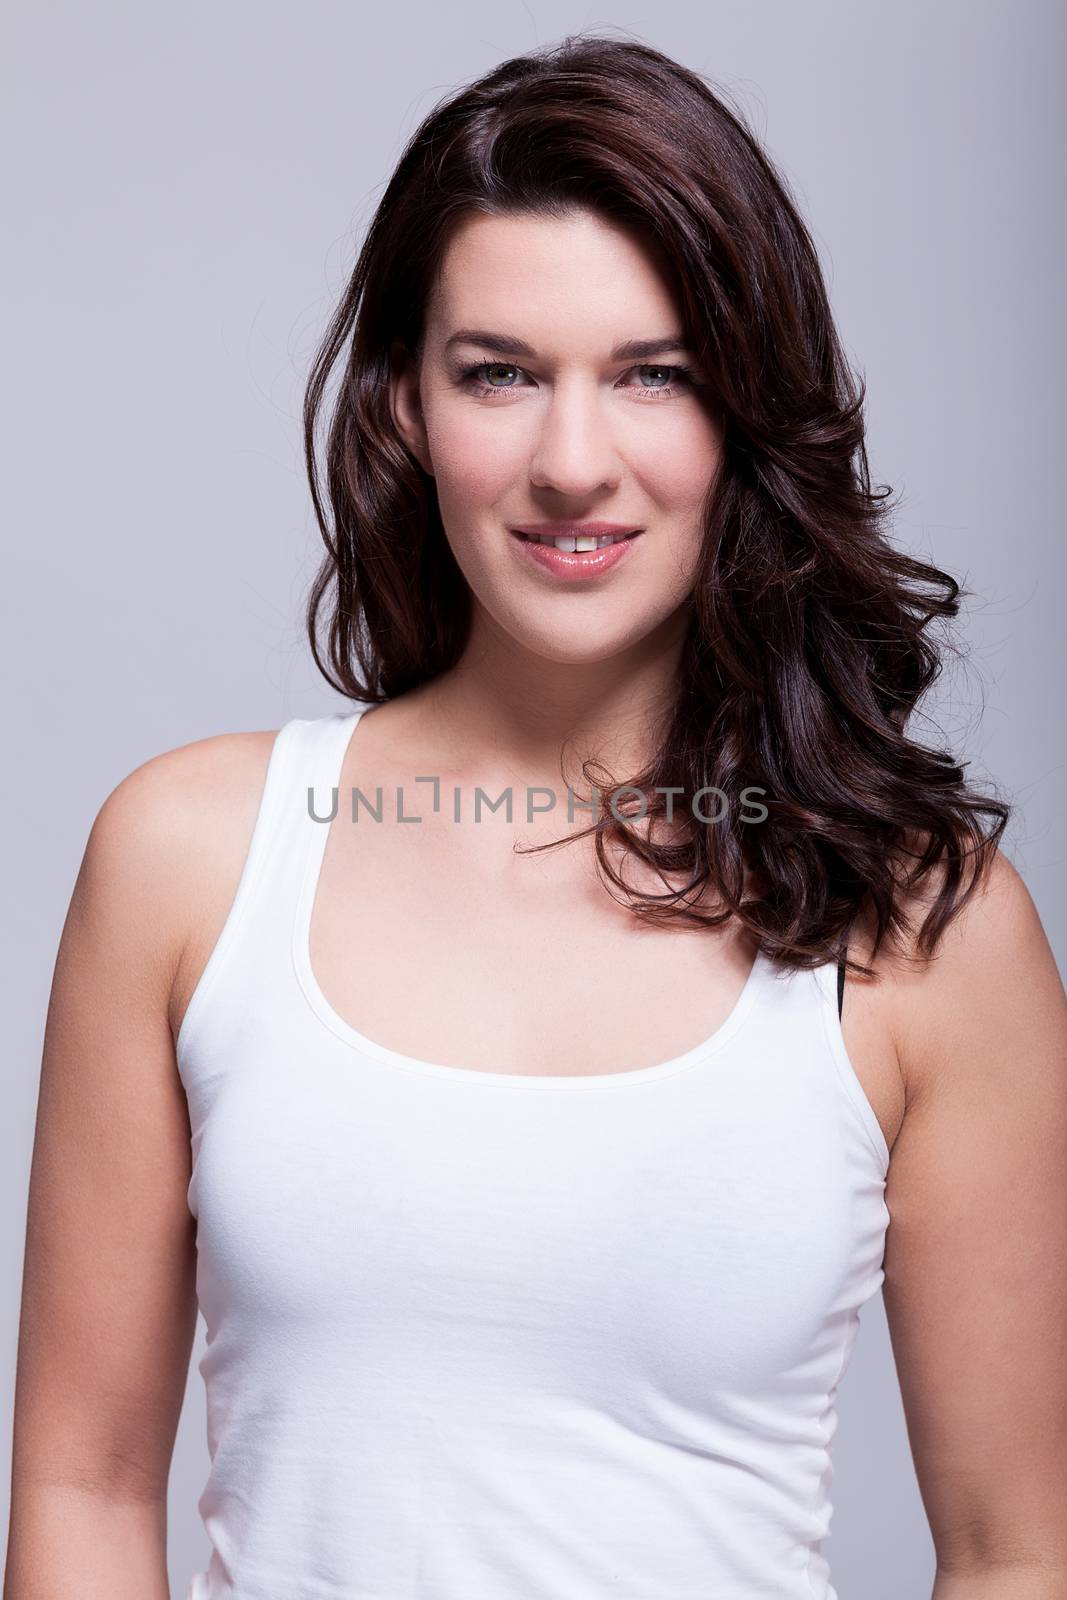 Smiling attractive woman with a lovely warm friendly smile and shoulder length curly brown hair looking at the camera over a grey background